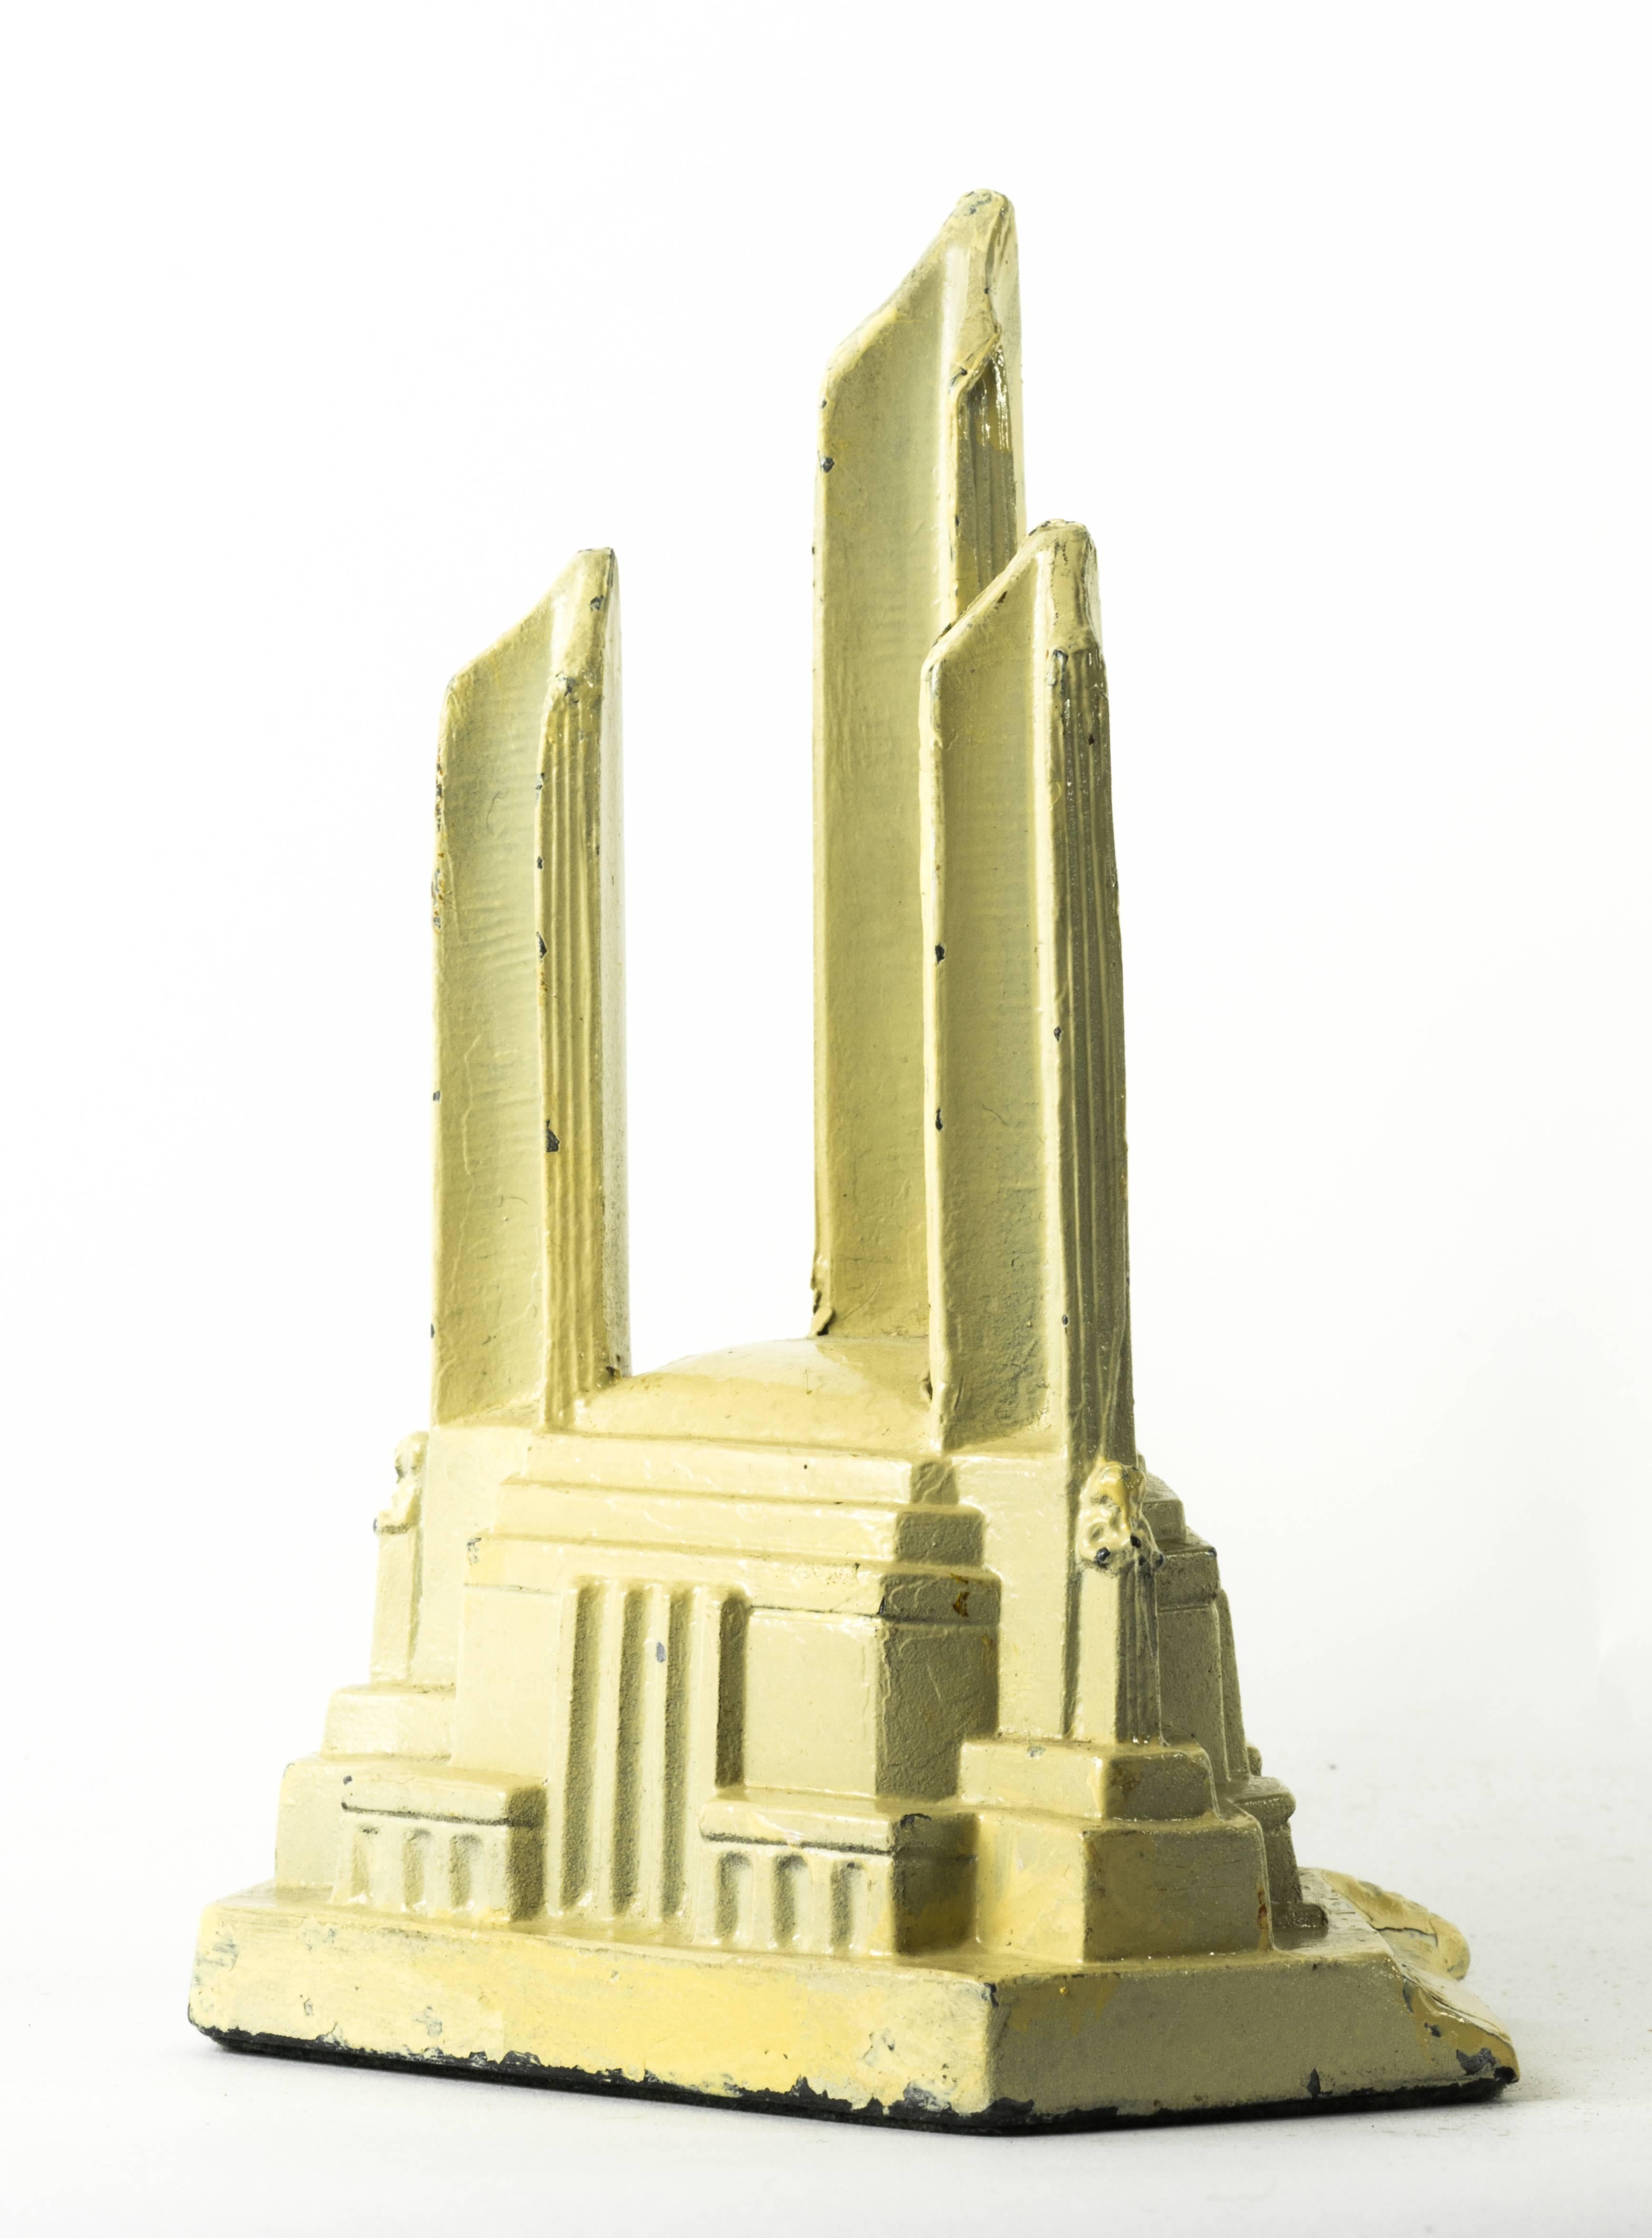 Federal building, 1933 century of Progress Exposition, Chicago Souvenir architectural model
from Piraneseum's Attic, this 4 1/2